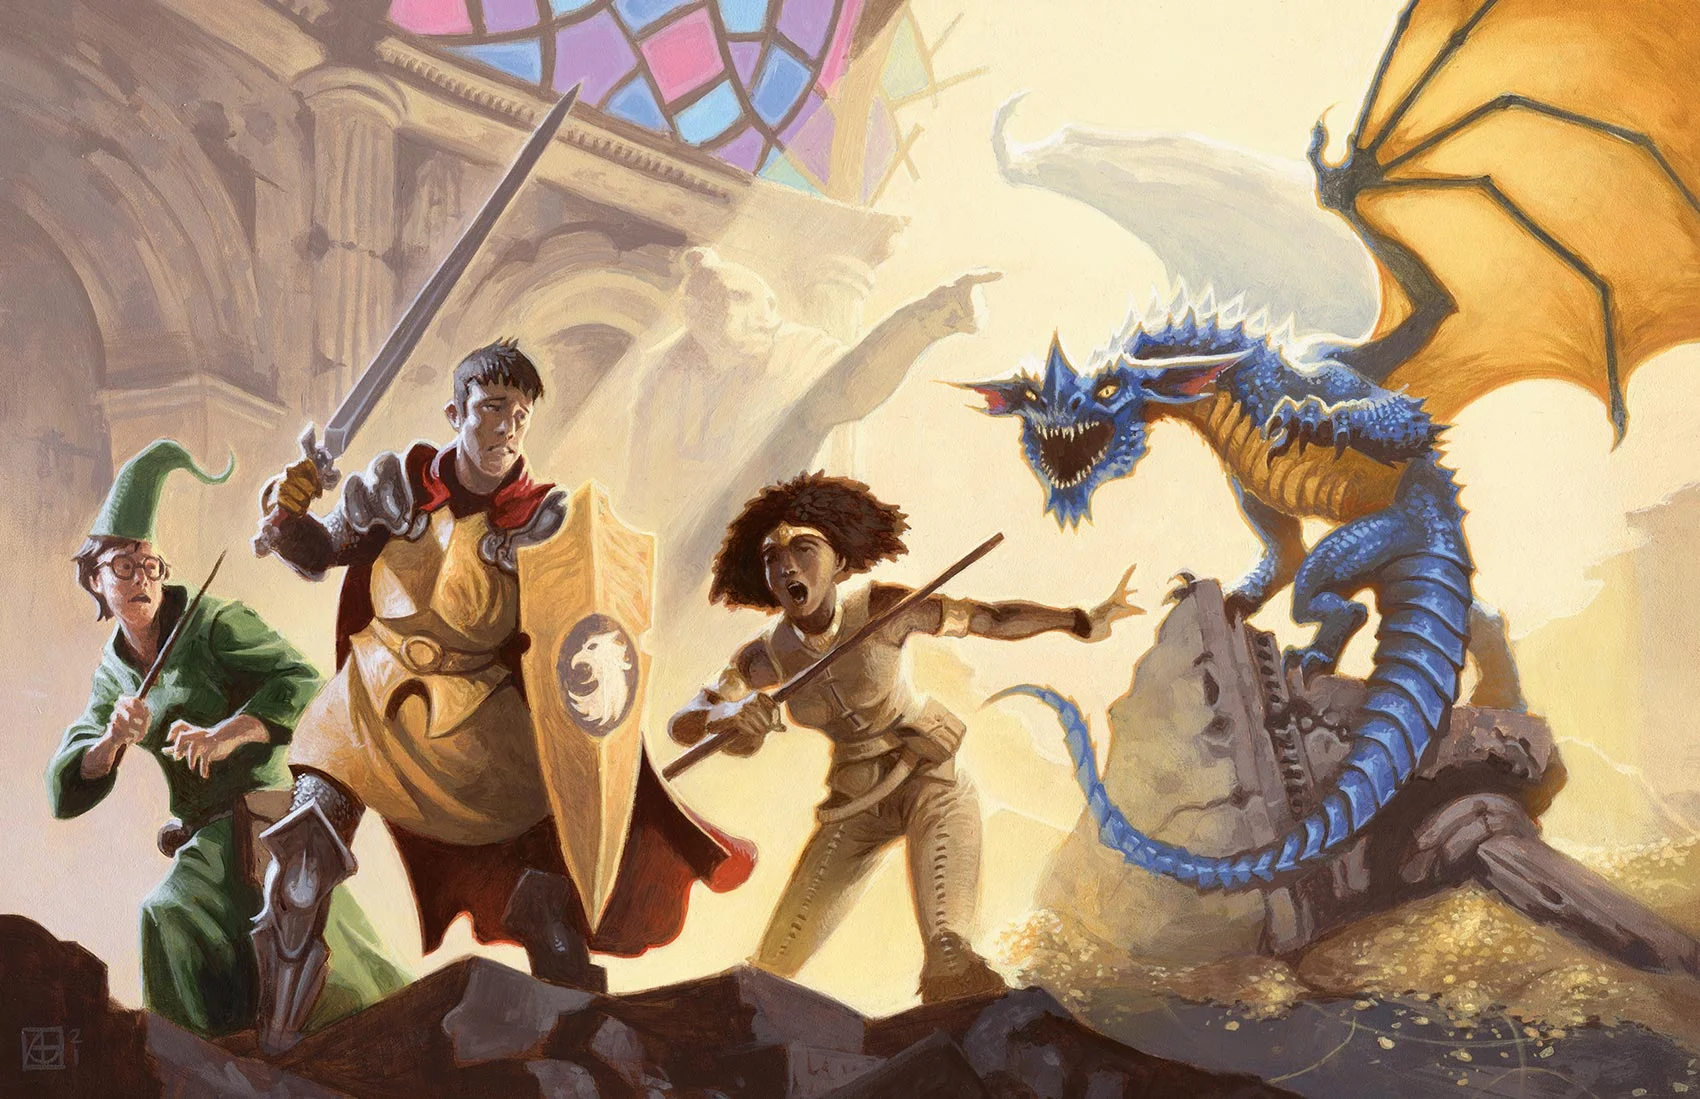 D&D: Inside 'The Book Of Many Things' Lurk Four Powerful